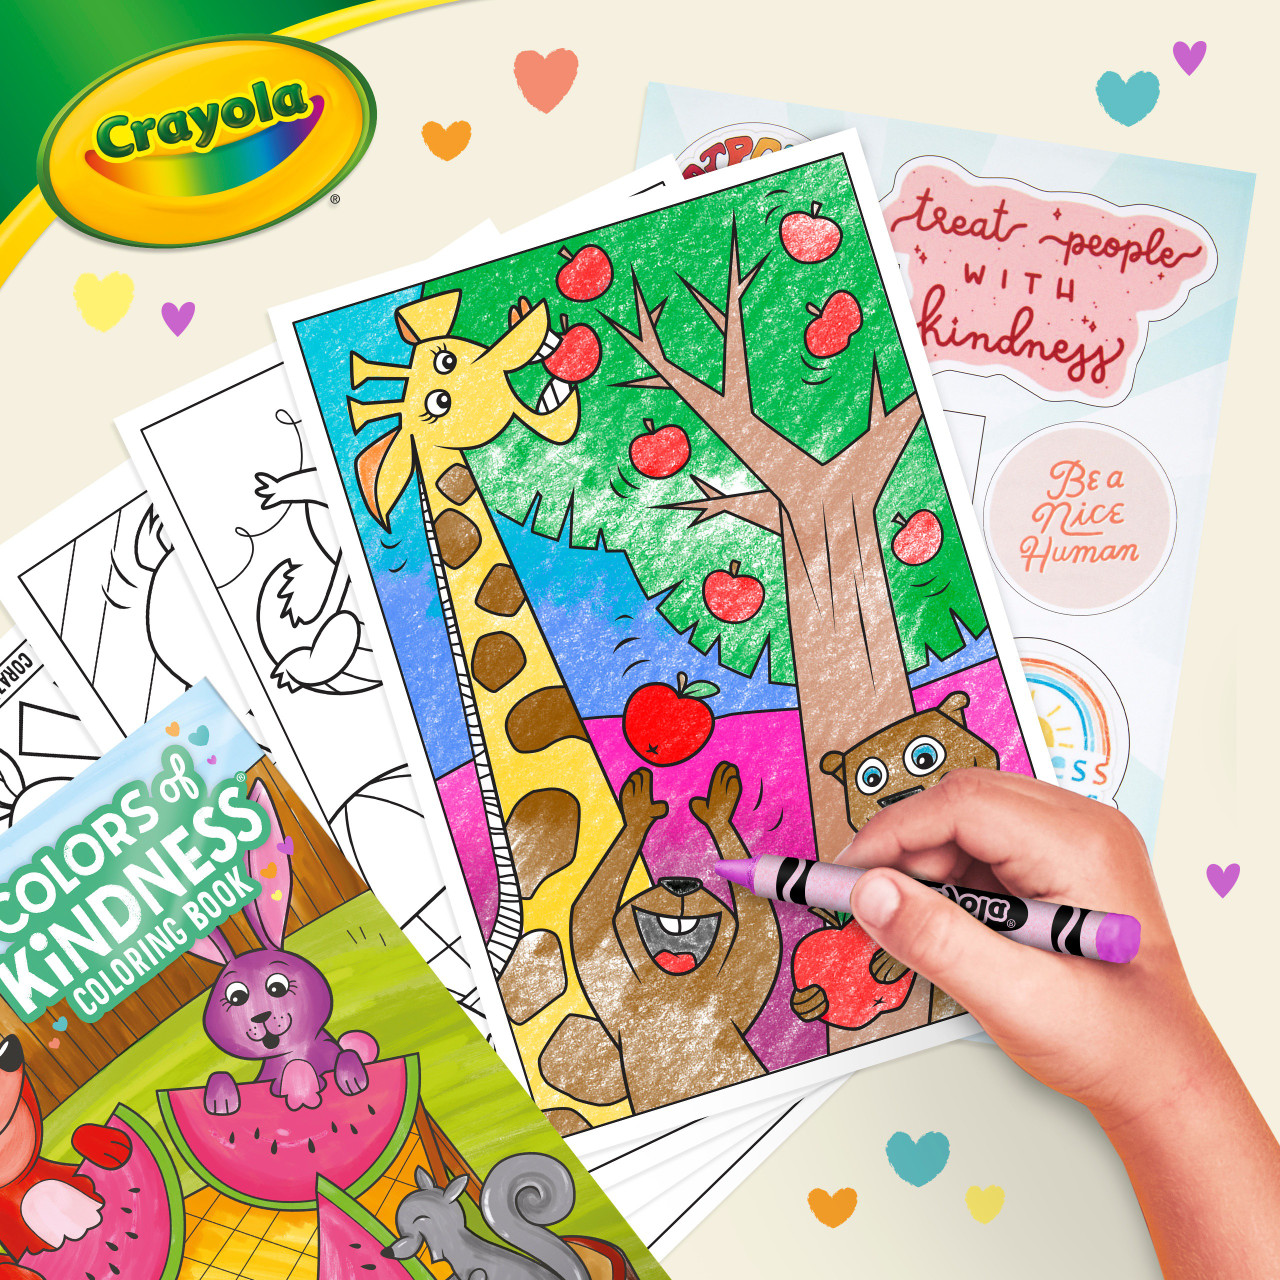 Crayola Pokémon Coloring Book, 96-Pages, Gift for Kids